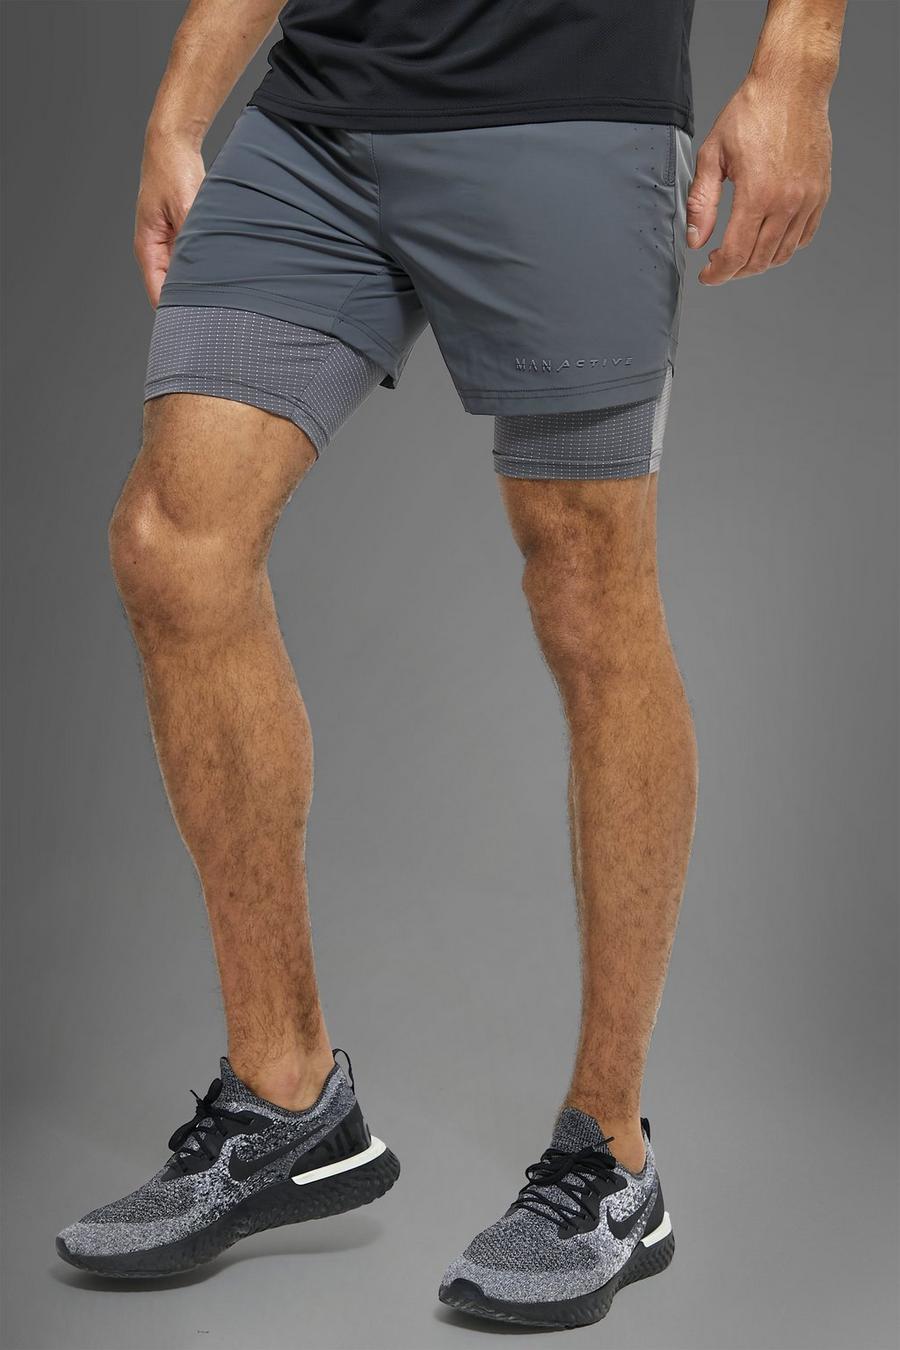 Man Active Gym 2-in-1 Shorts, Charcoal gris image number 1